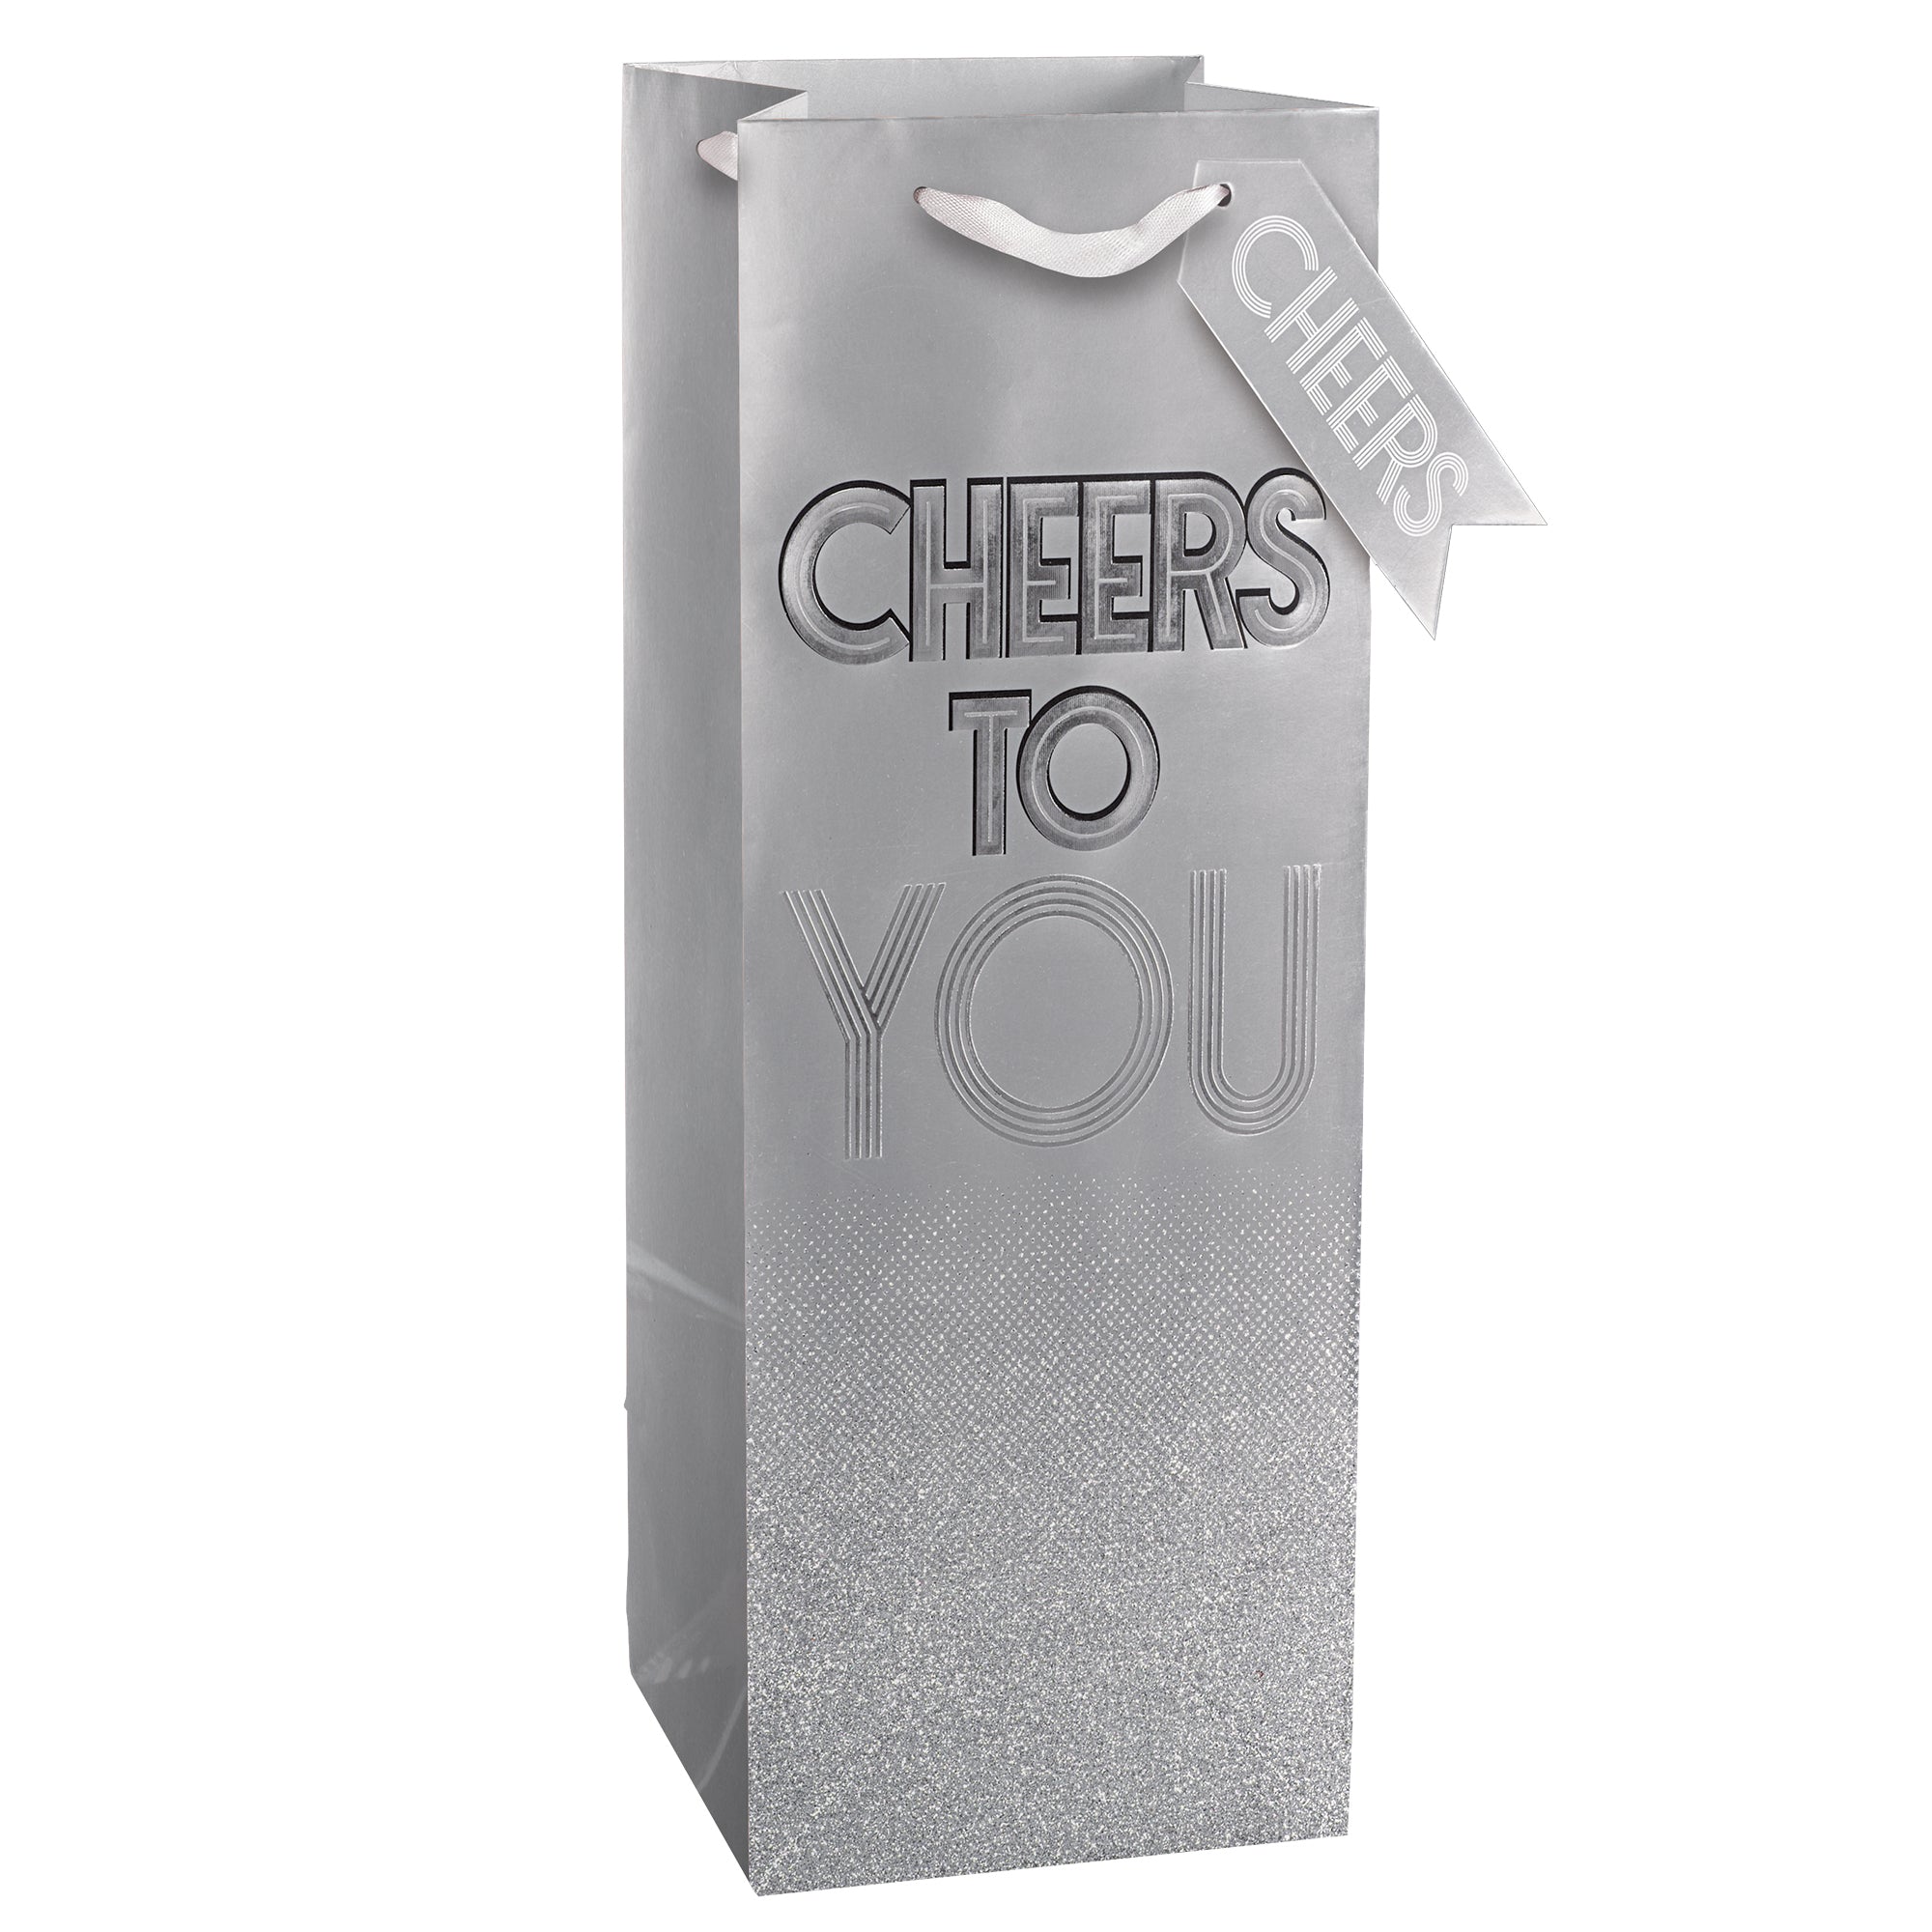 Cheers To You Bottle Bag w/ Gift Tag